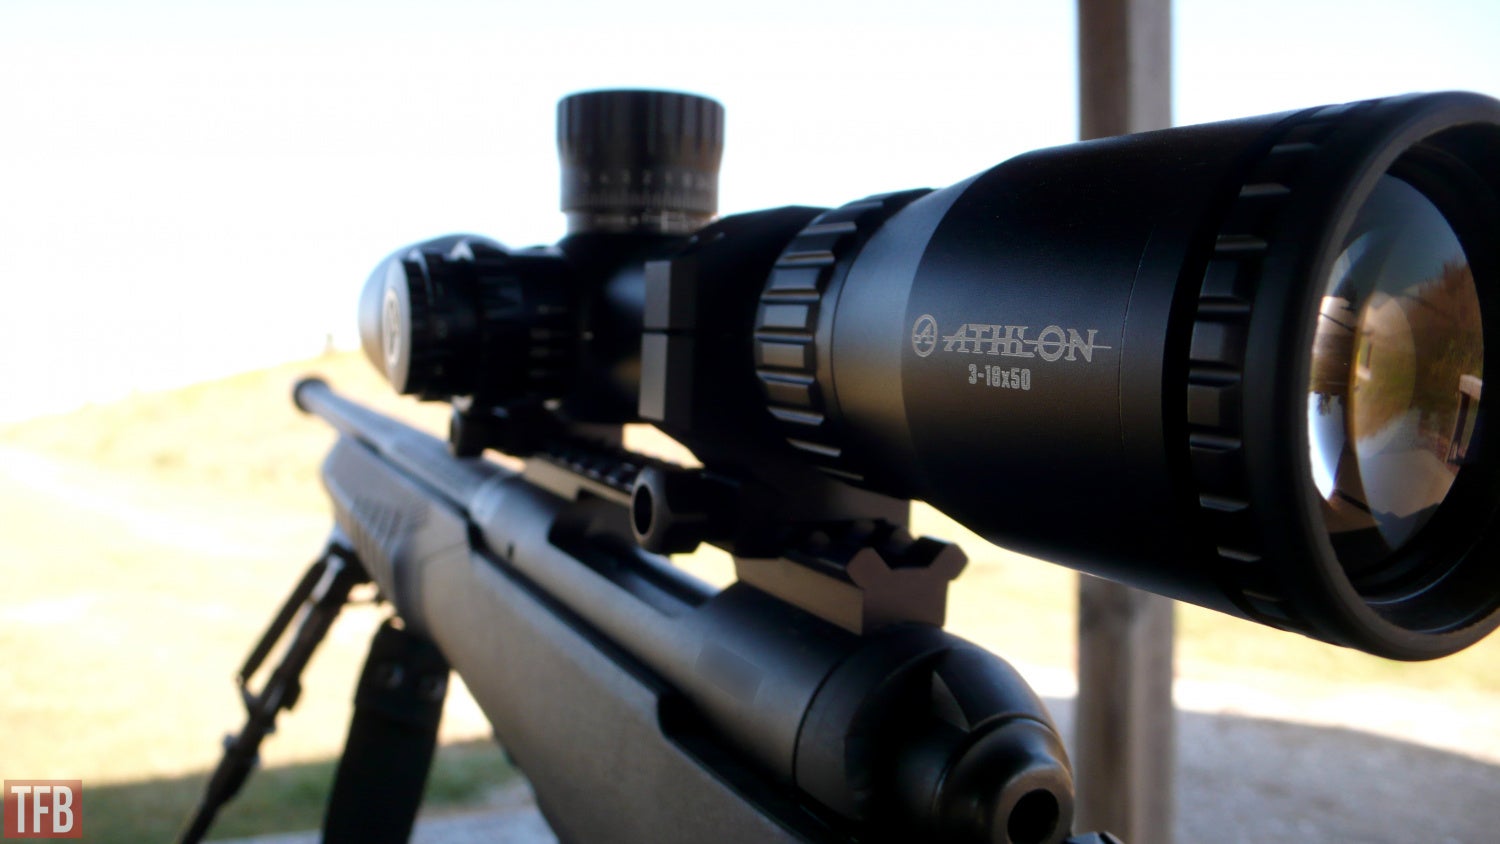 Athlon ARES scope review